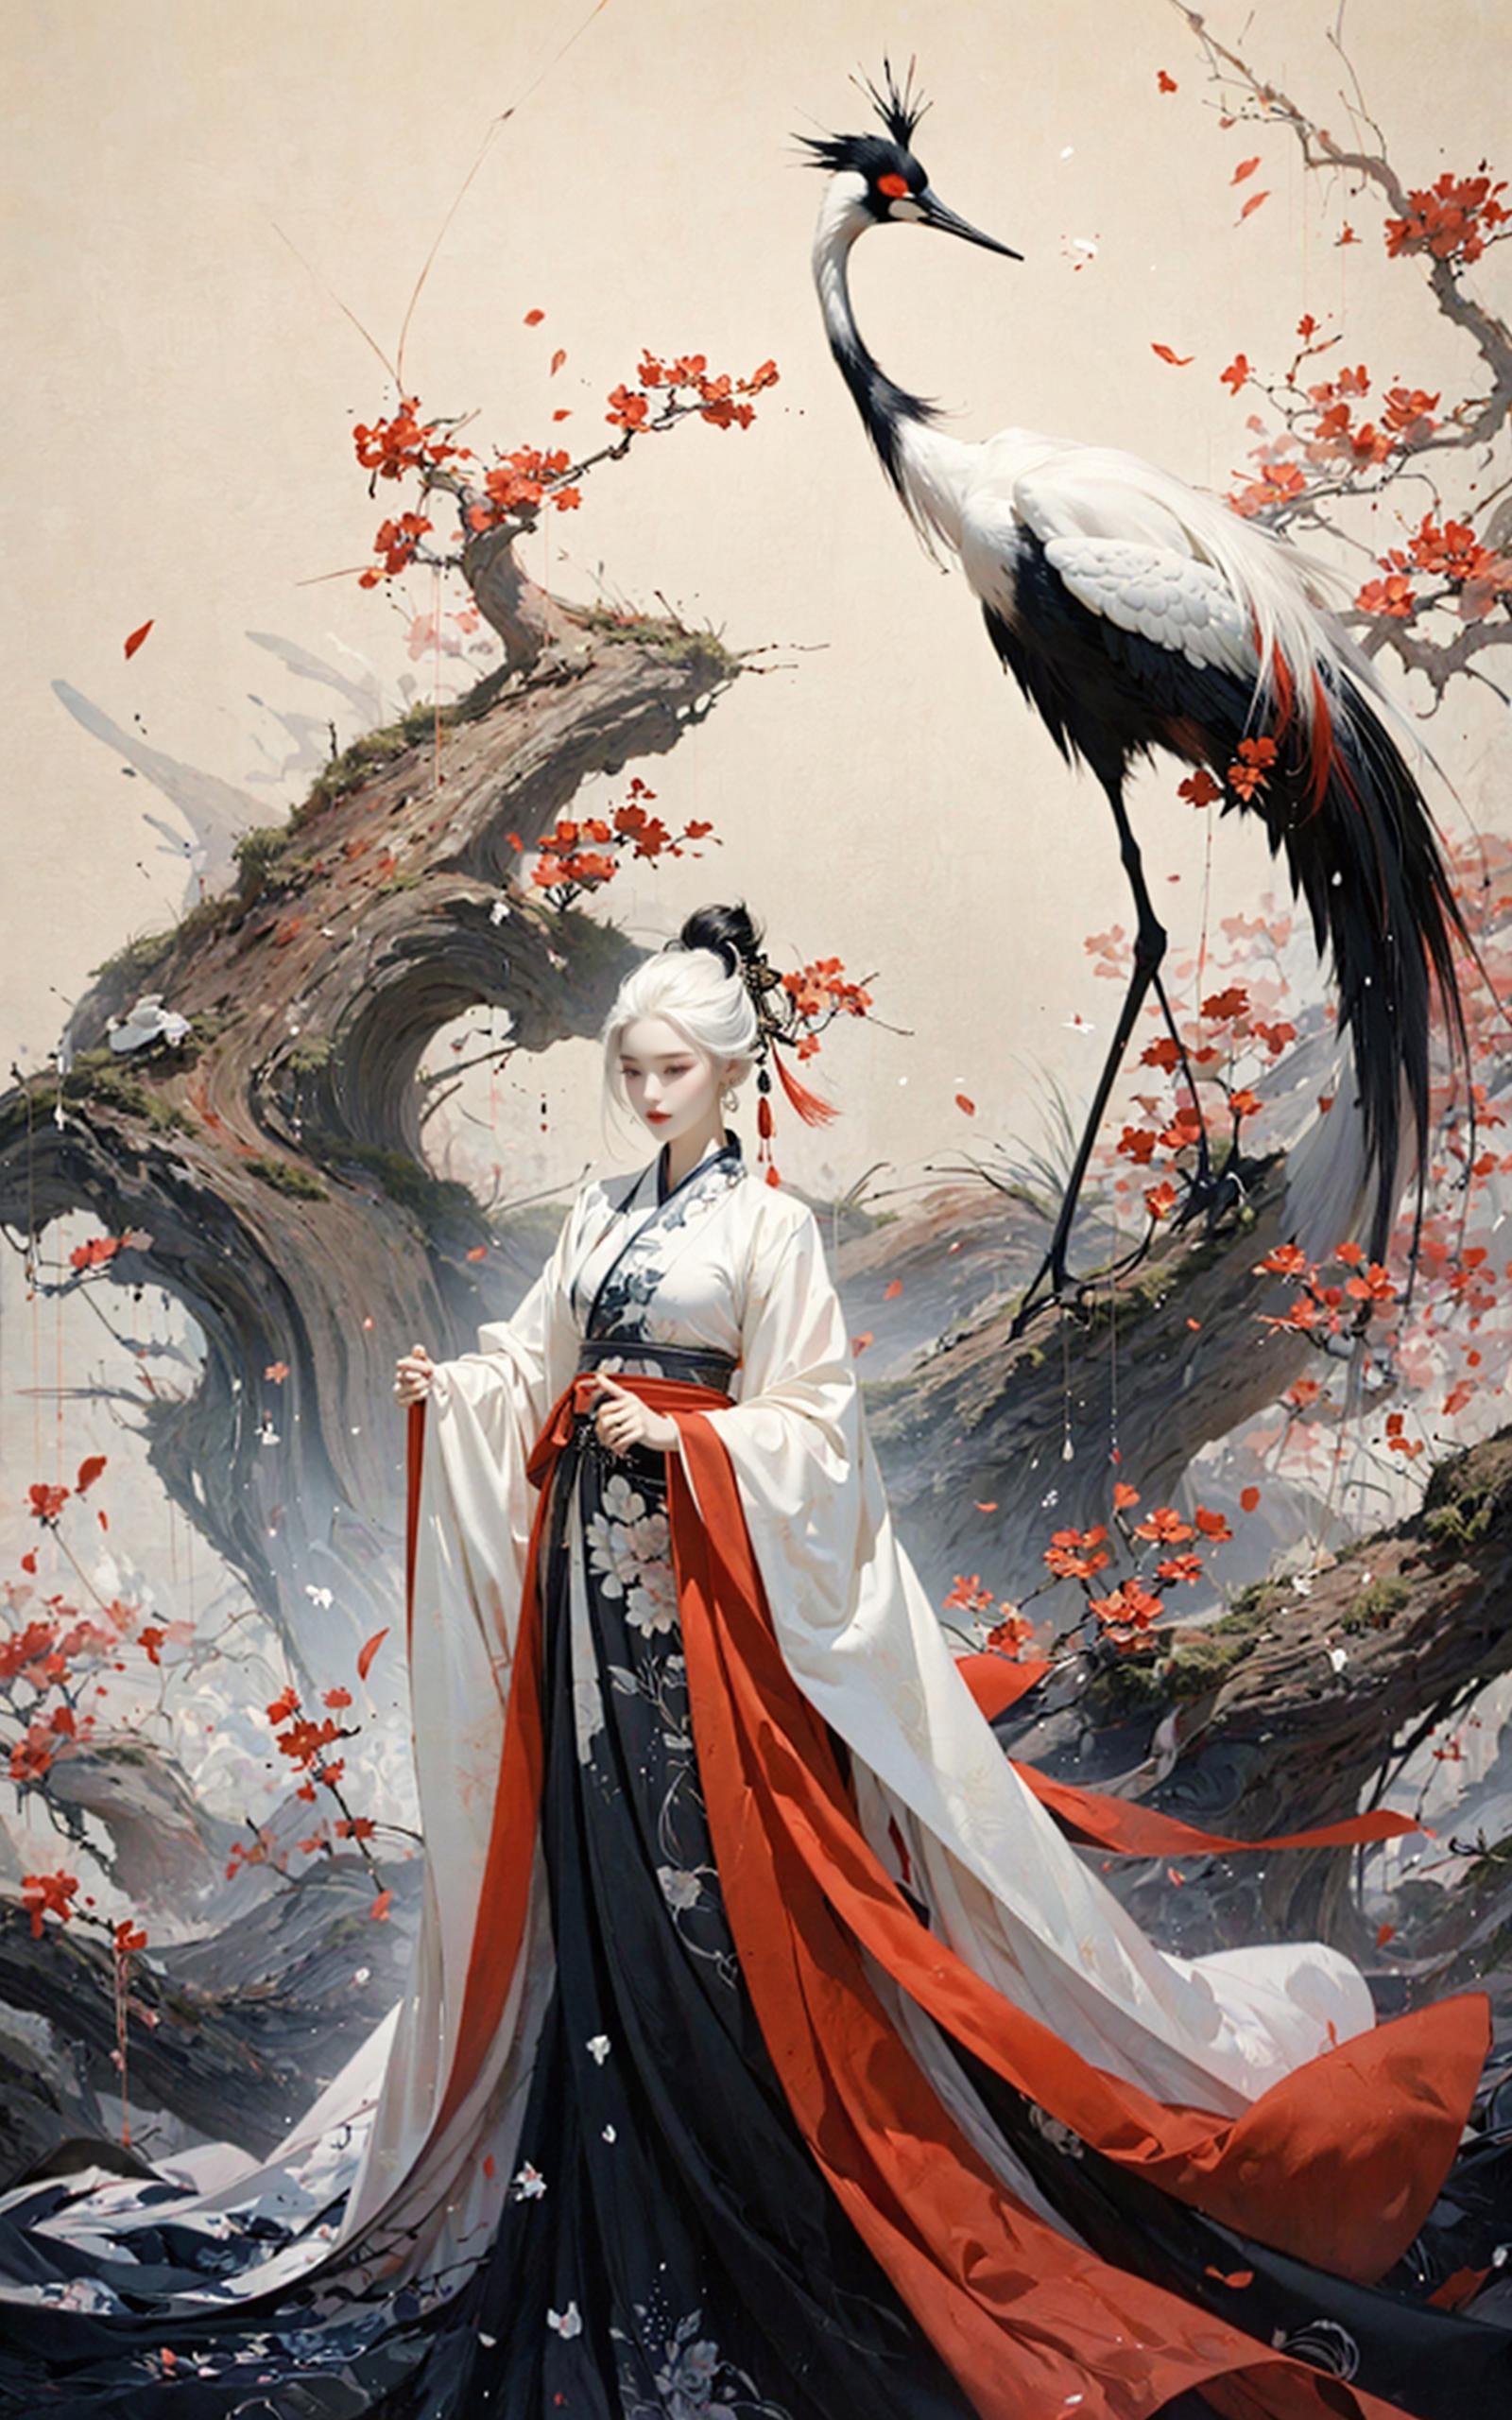 An artistic painting of a woman in a white dress and a bird in a tree.